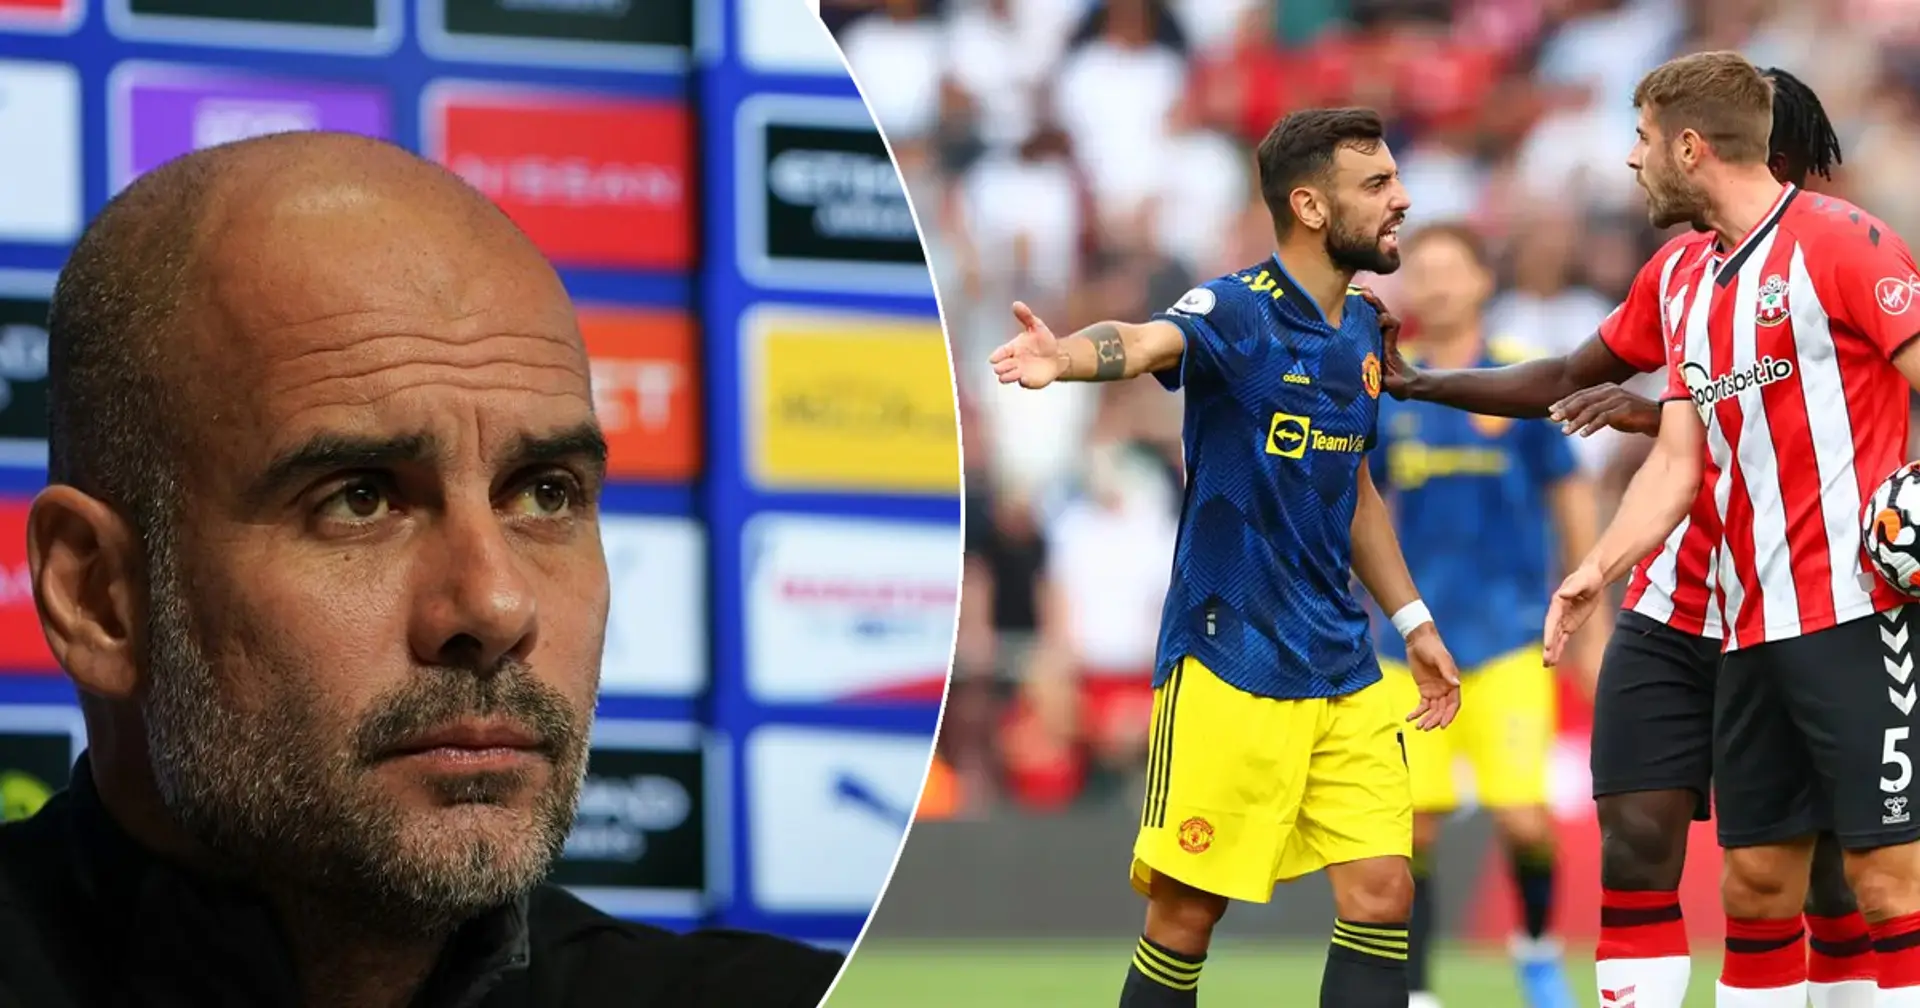 'Man United were lucky not to lose': Pep Guardiola believes Southampton 'deserved to win' 1-1 draw